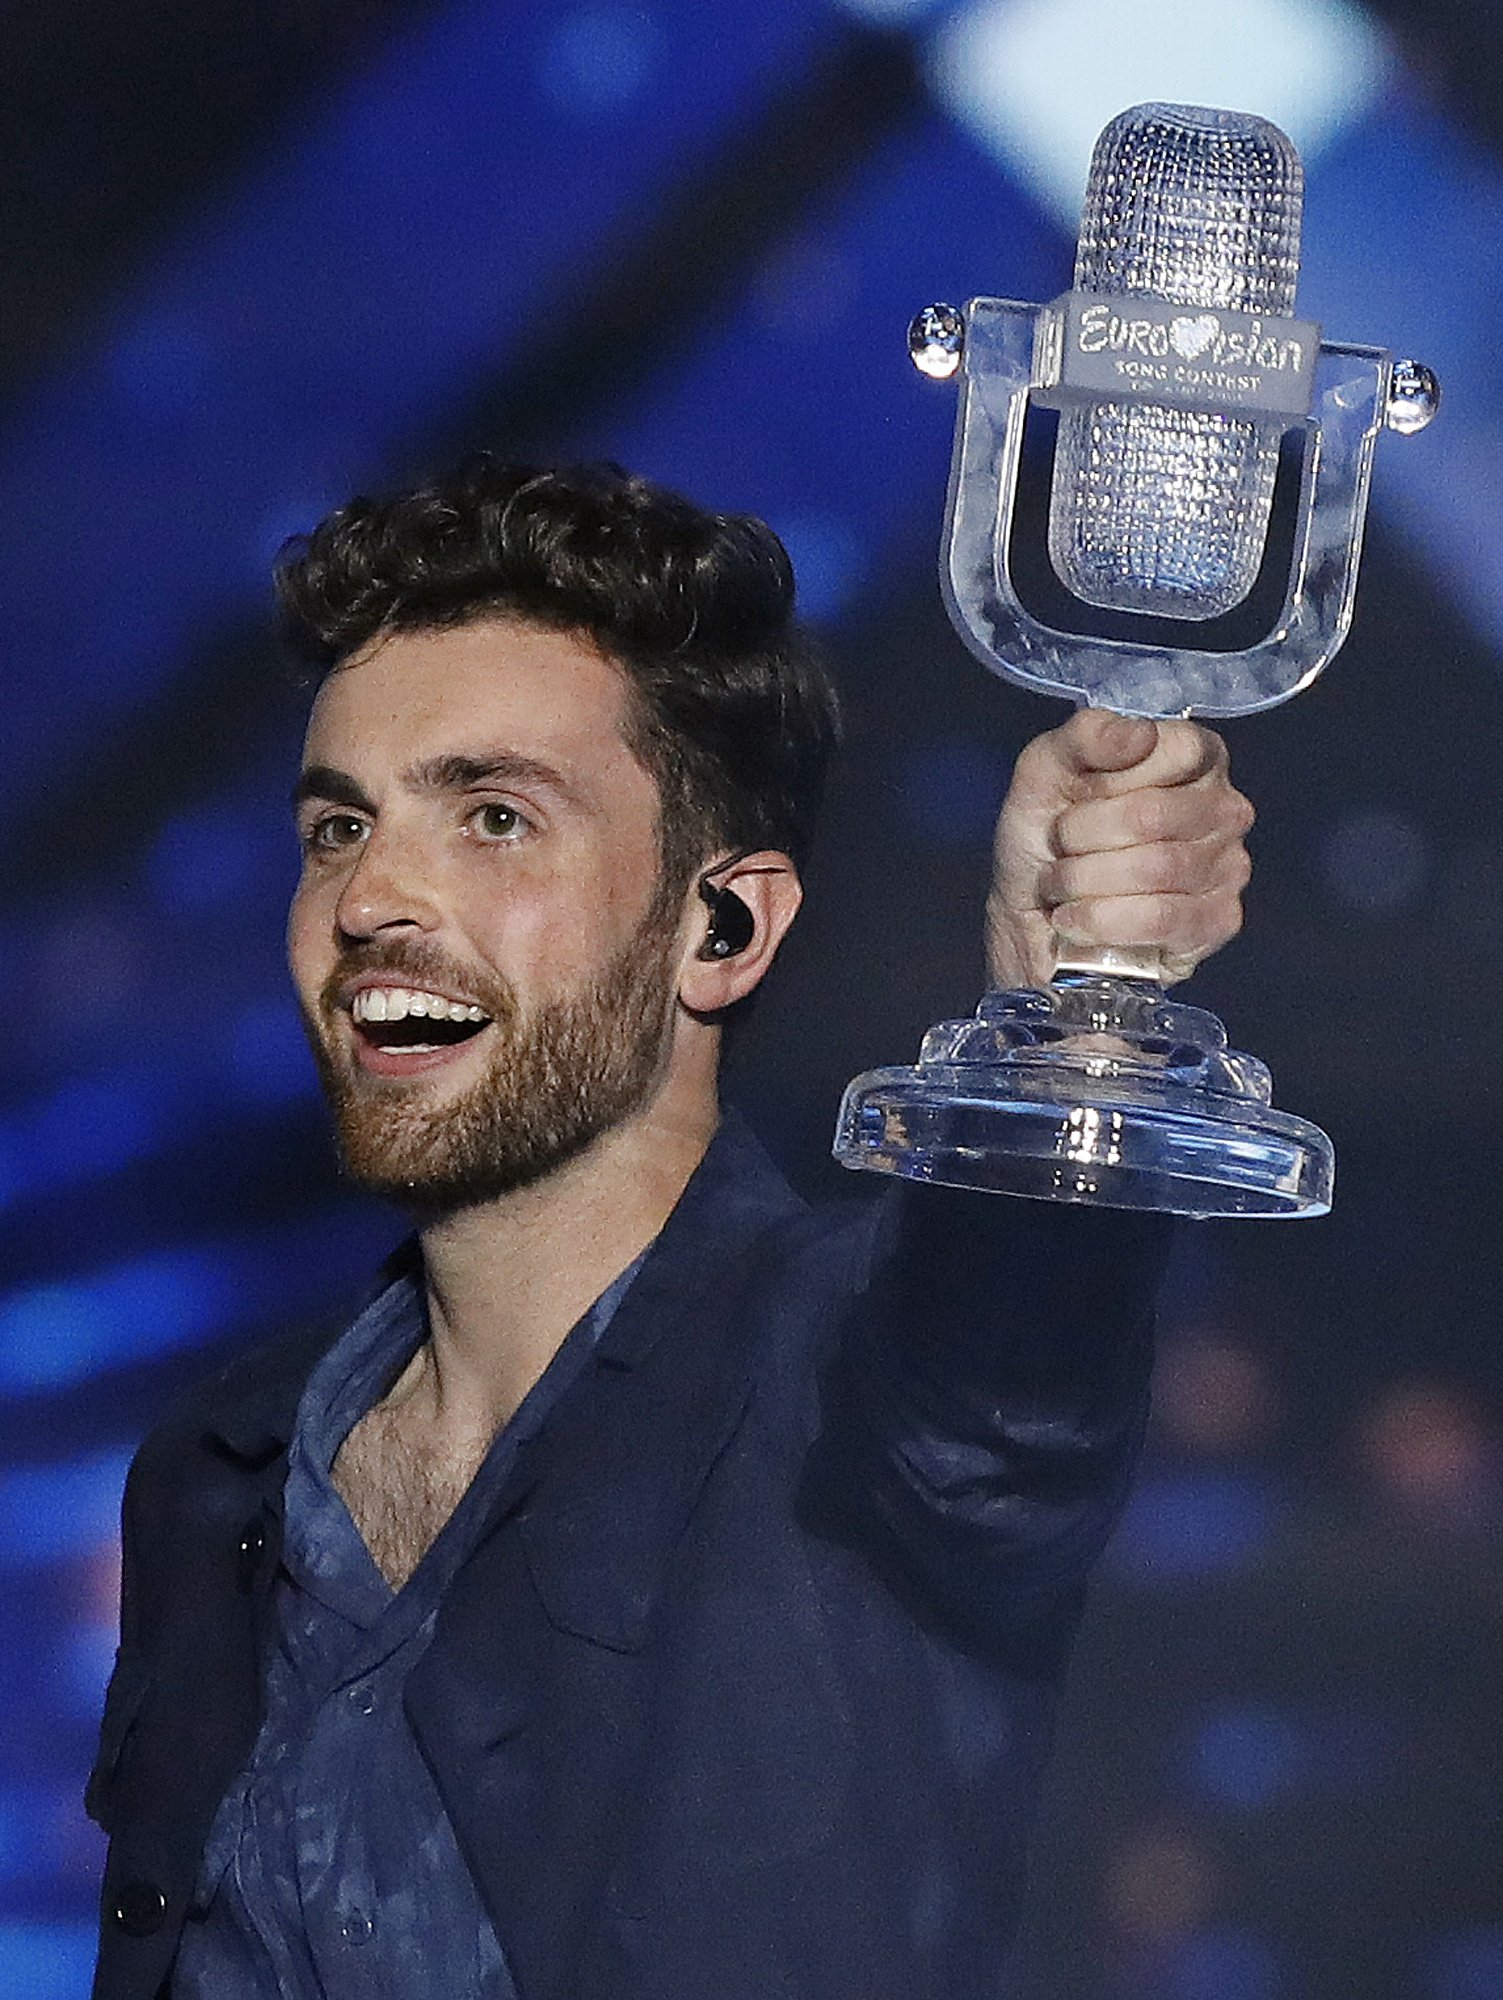 Netherlands wins 2019 Eurovision Song Contest